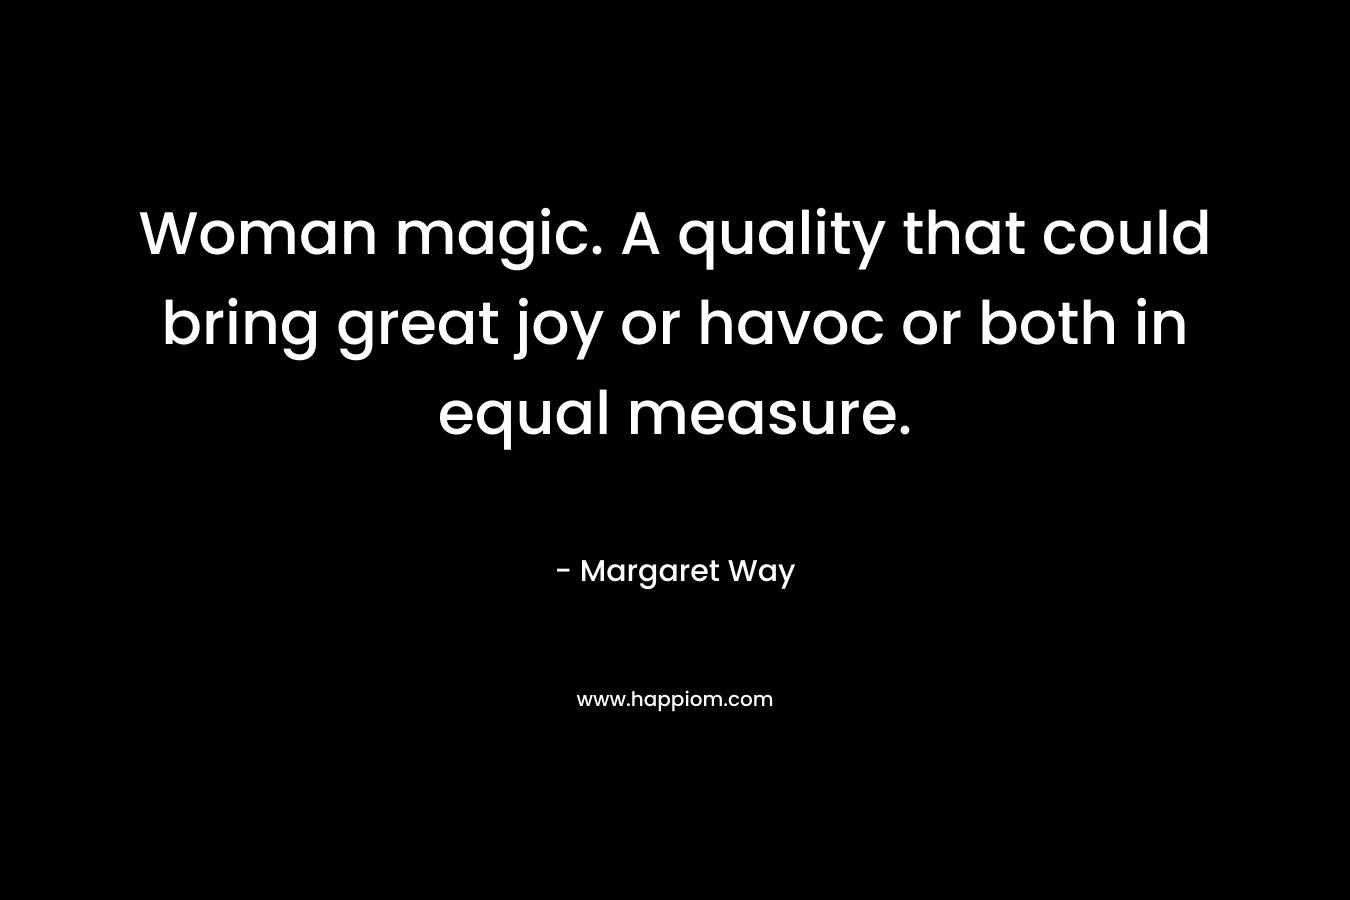 Woman magic. A quality that could bring great joy or havoc or both in equal measure. – Margaret Way